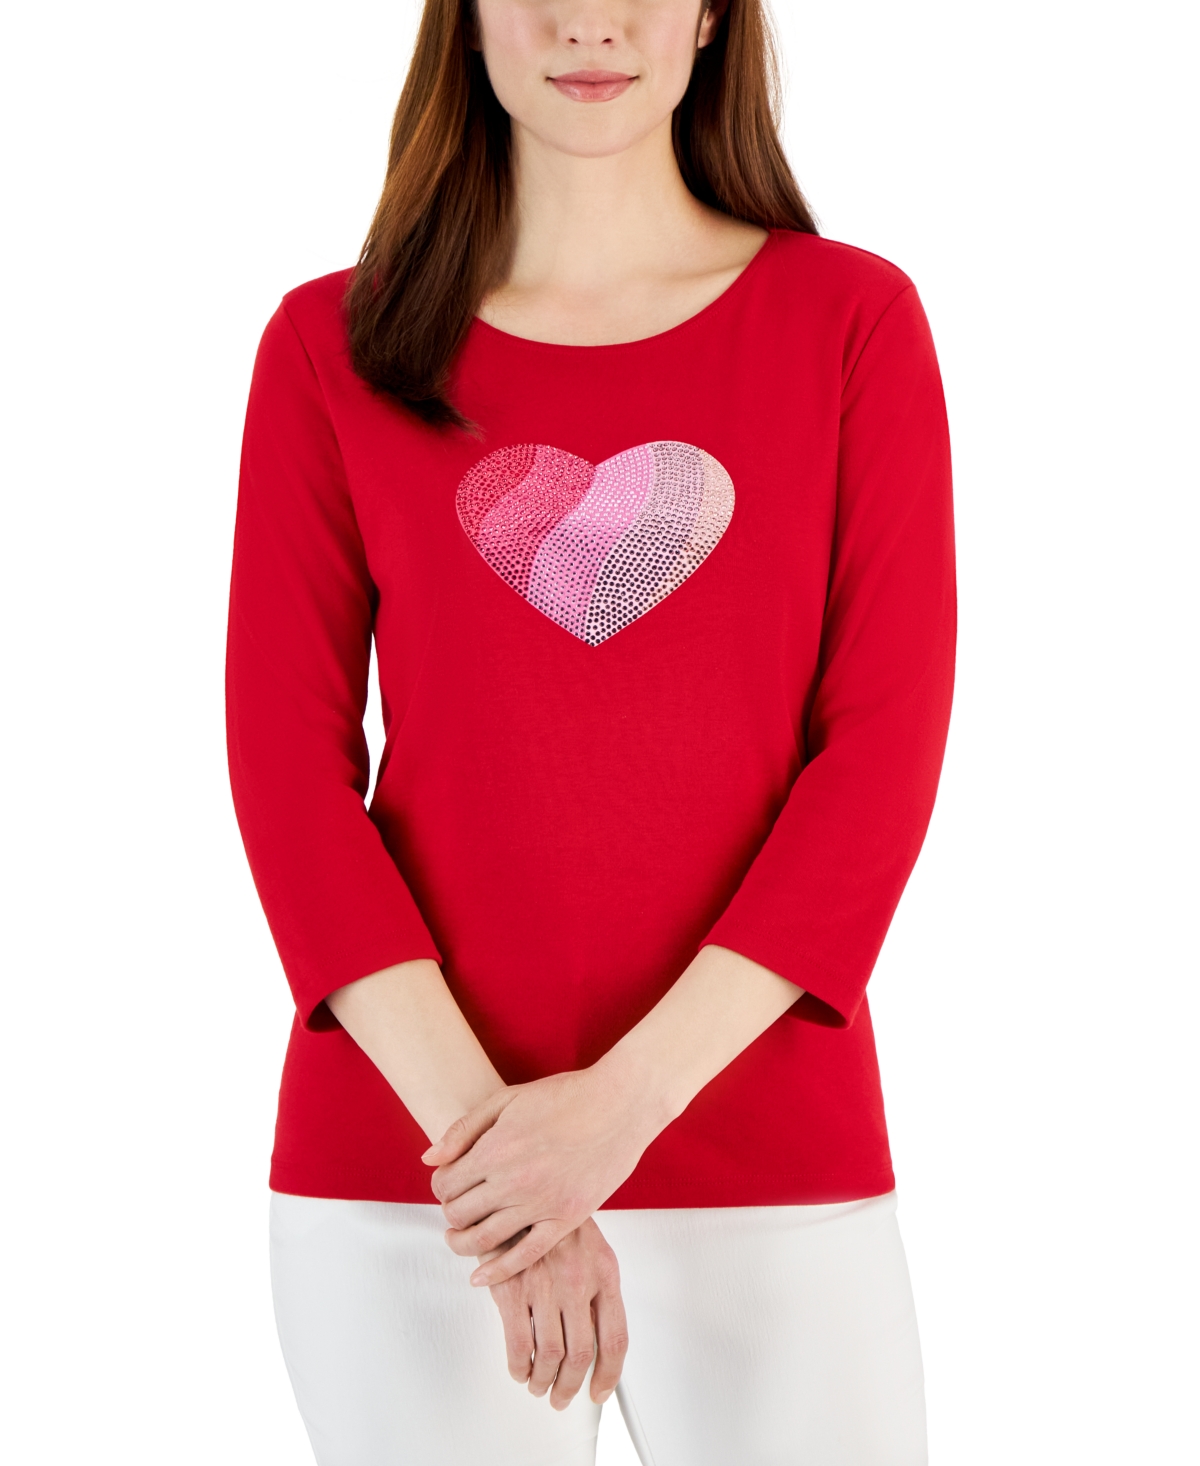 Women's Gem Heart Graphic Pullover Top, Created for Macy's - New Red Amore